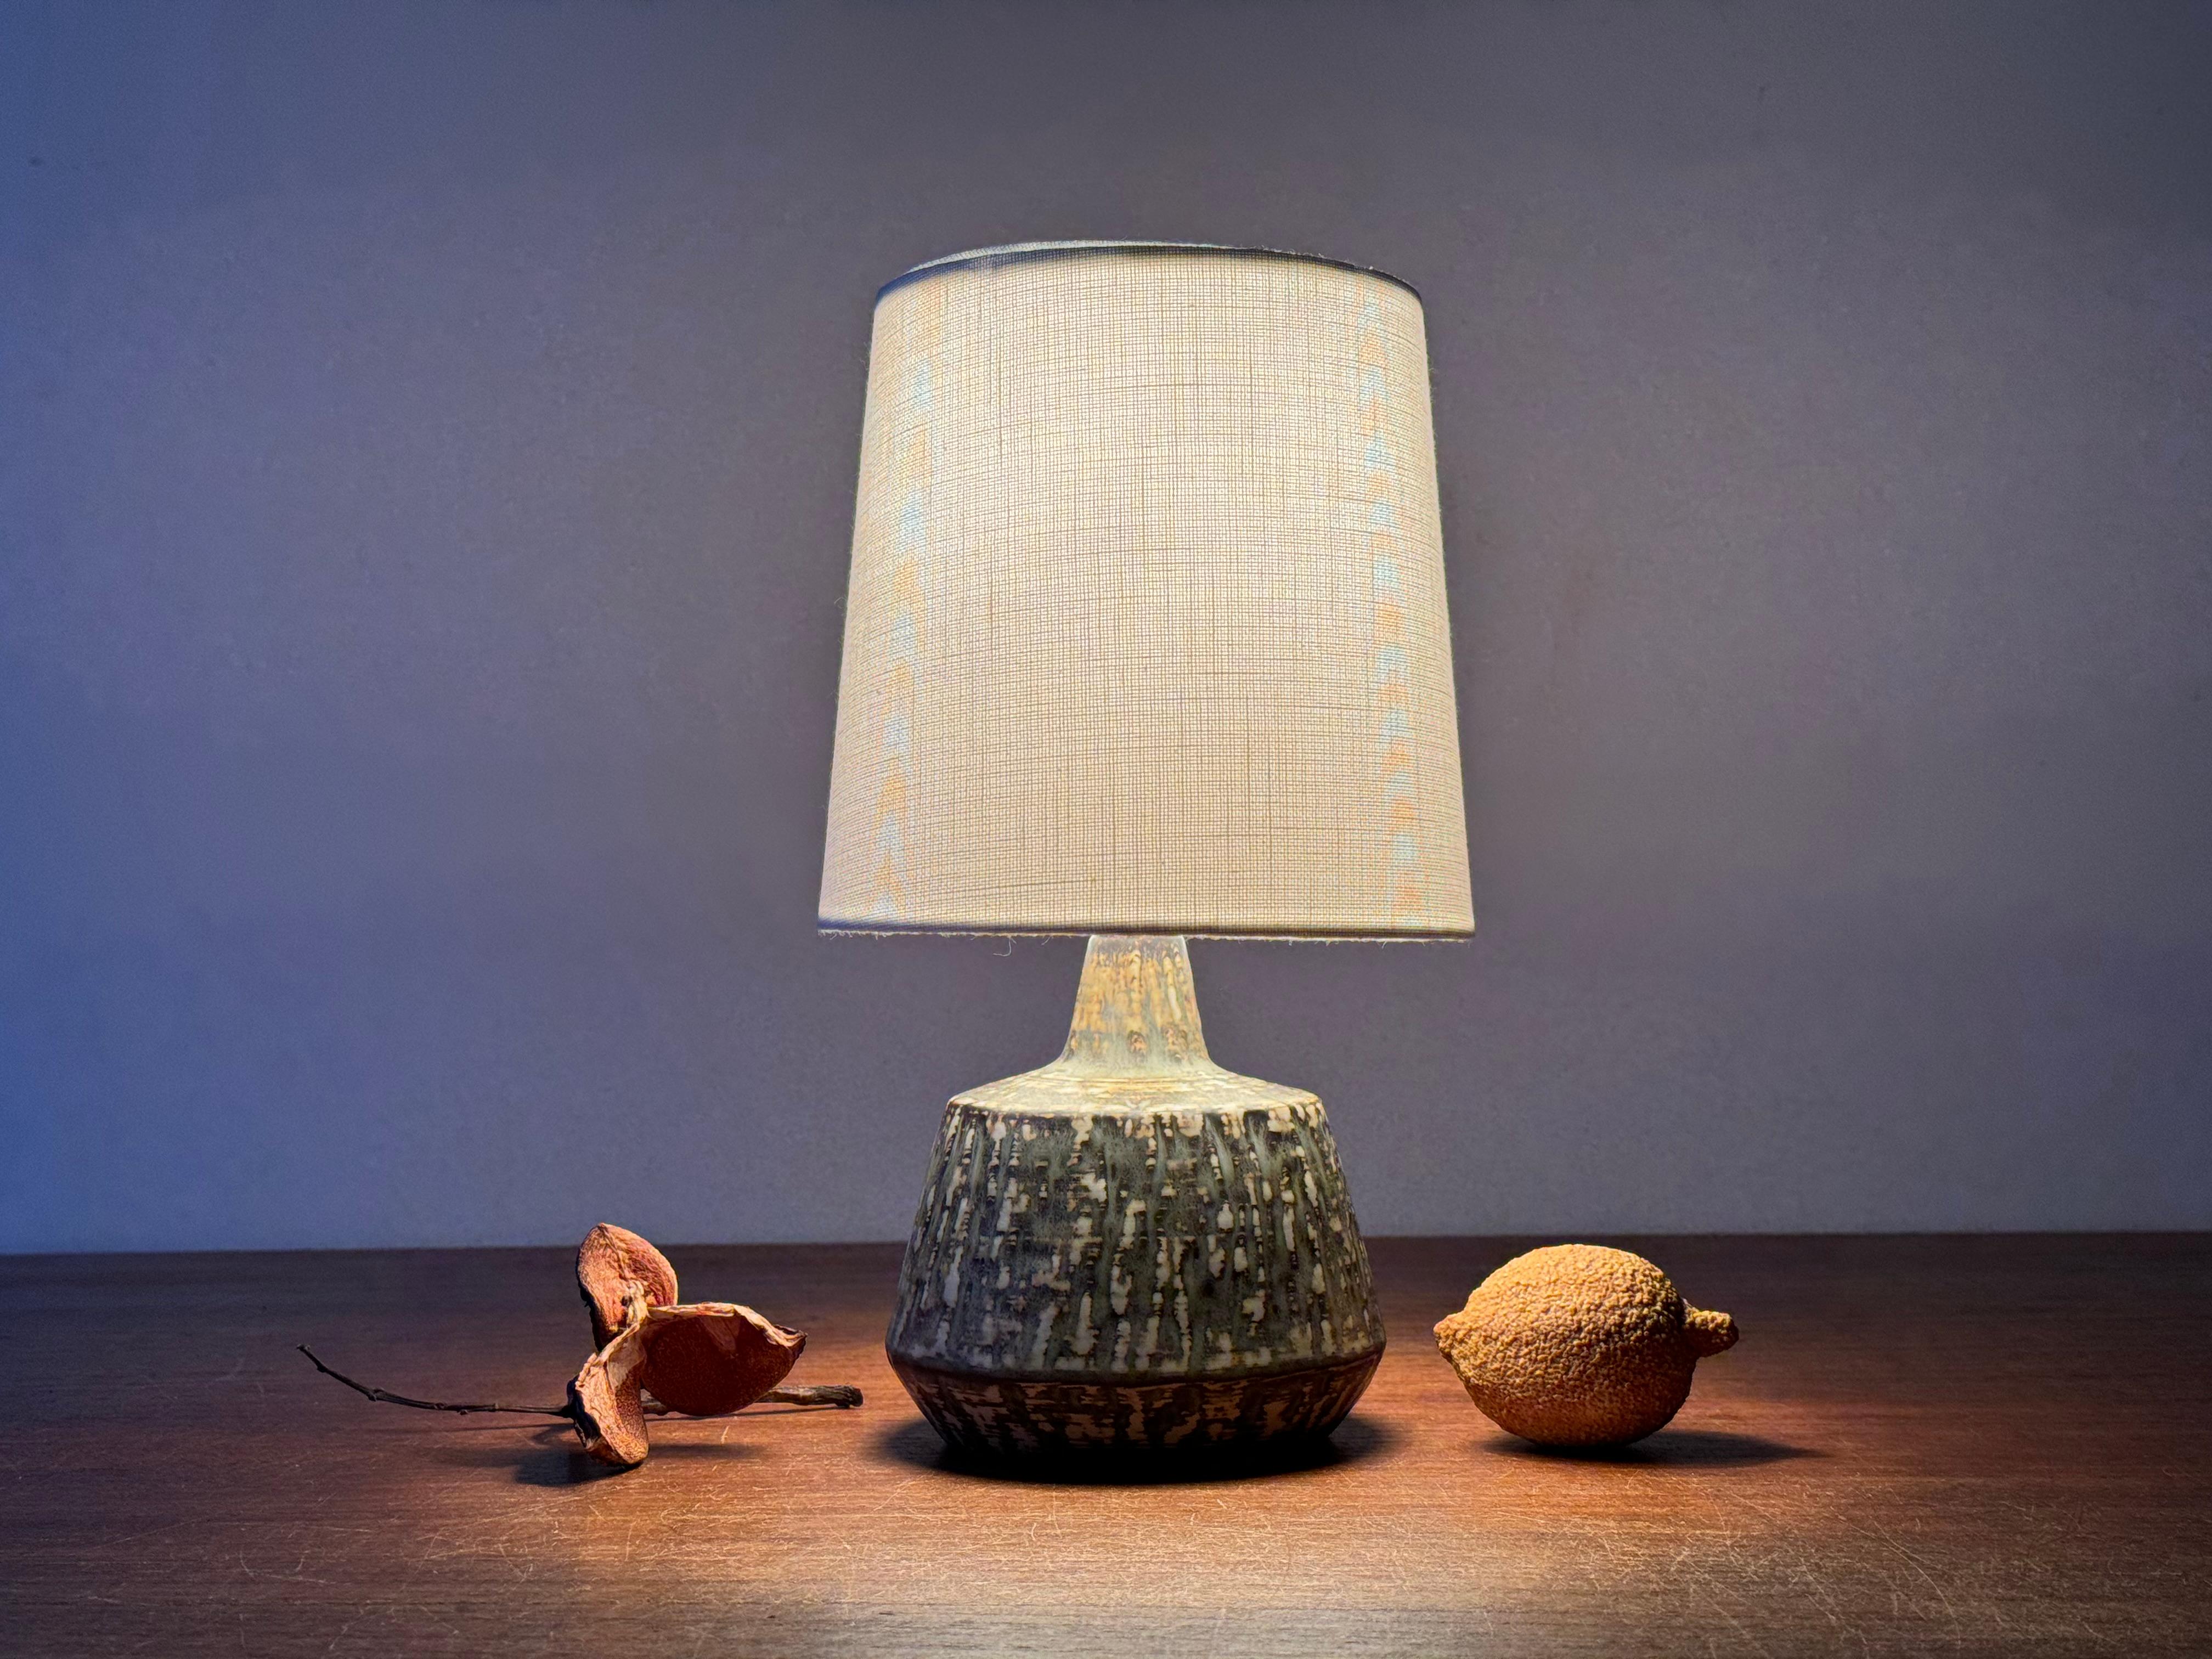 Small ceramic table lamp by Gunnar Nylund for Rörstrand, Sweden.
It´s part of the 